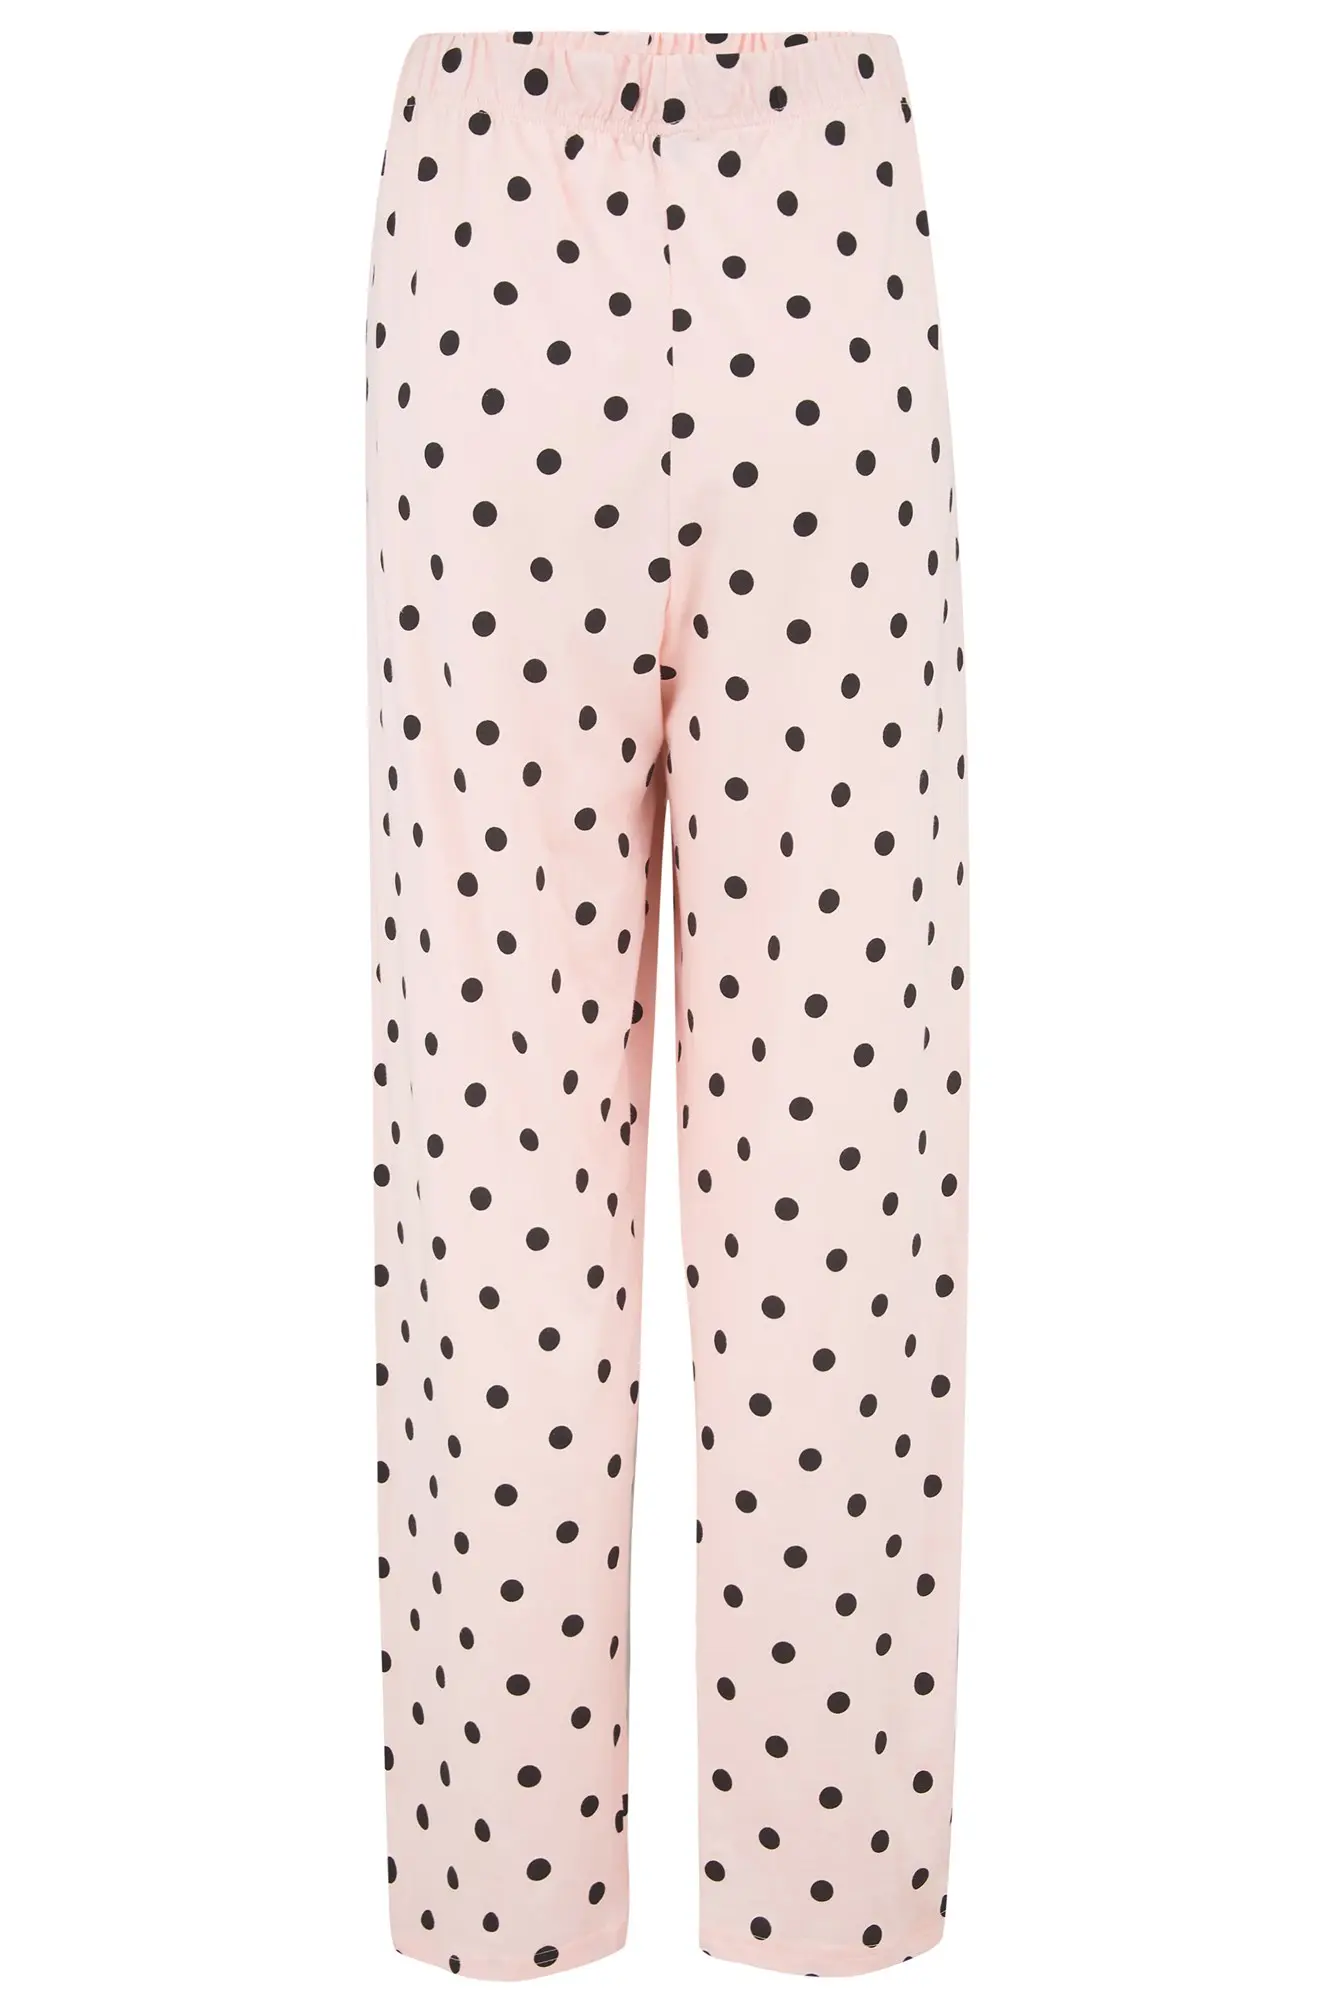 Sore Head Stay in Bed Cotton Jersey Pyjama Set | Black/Pink | Pour Moi